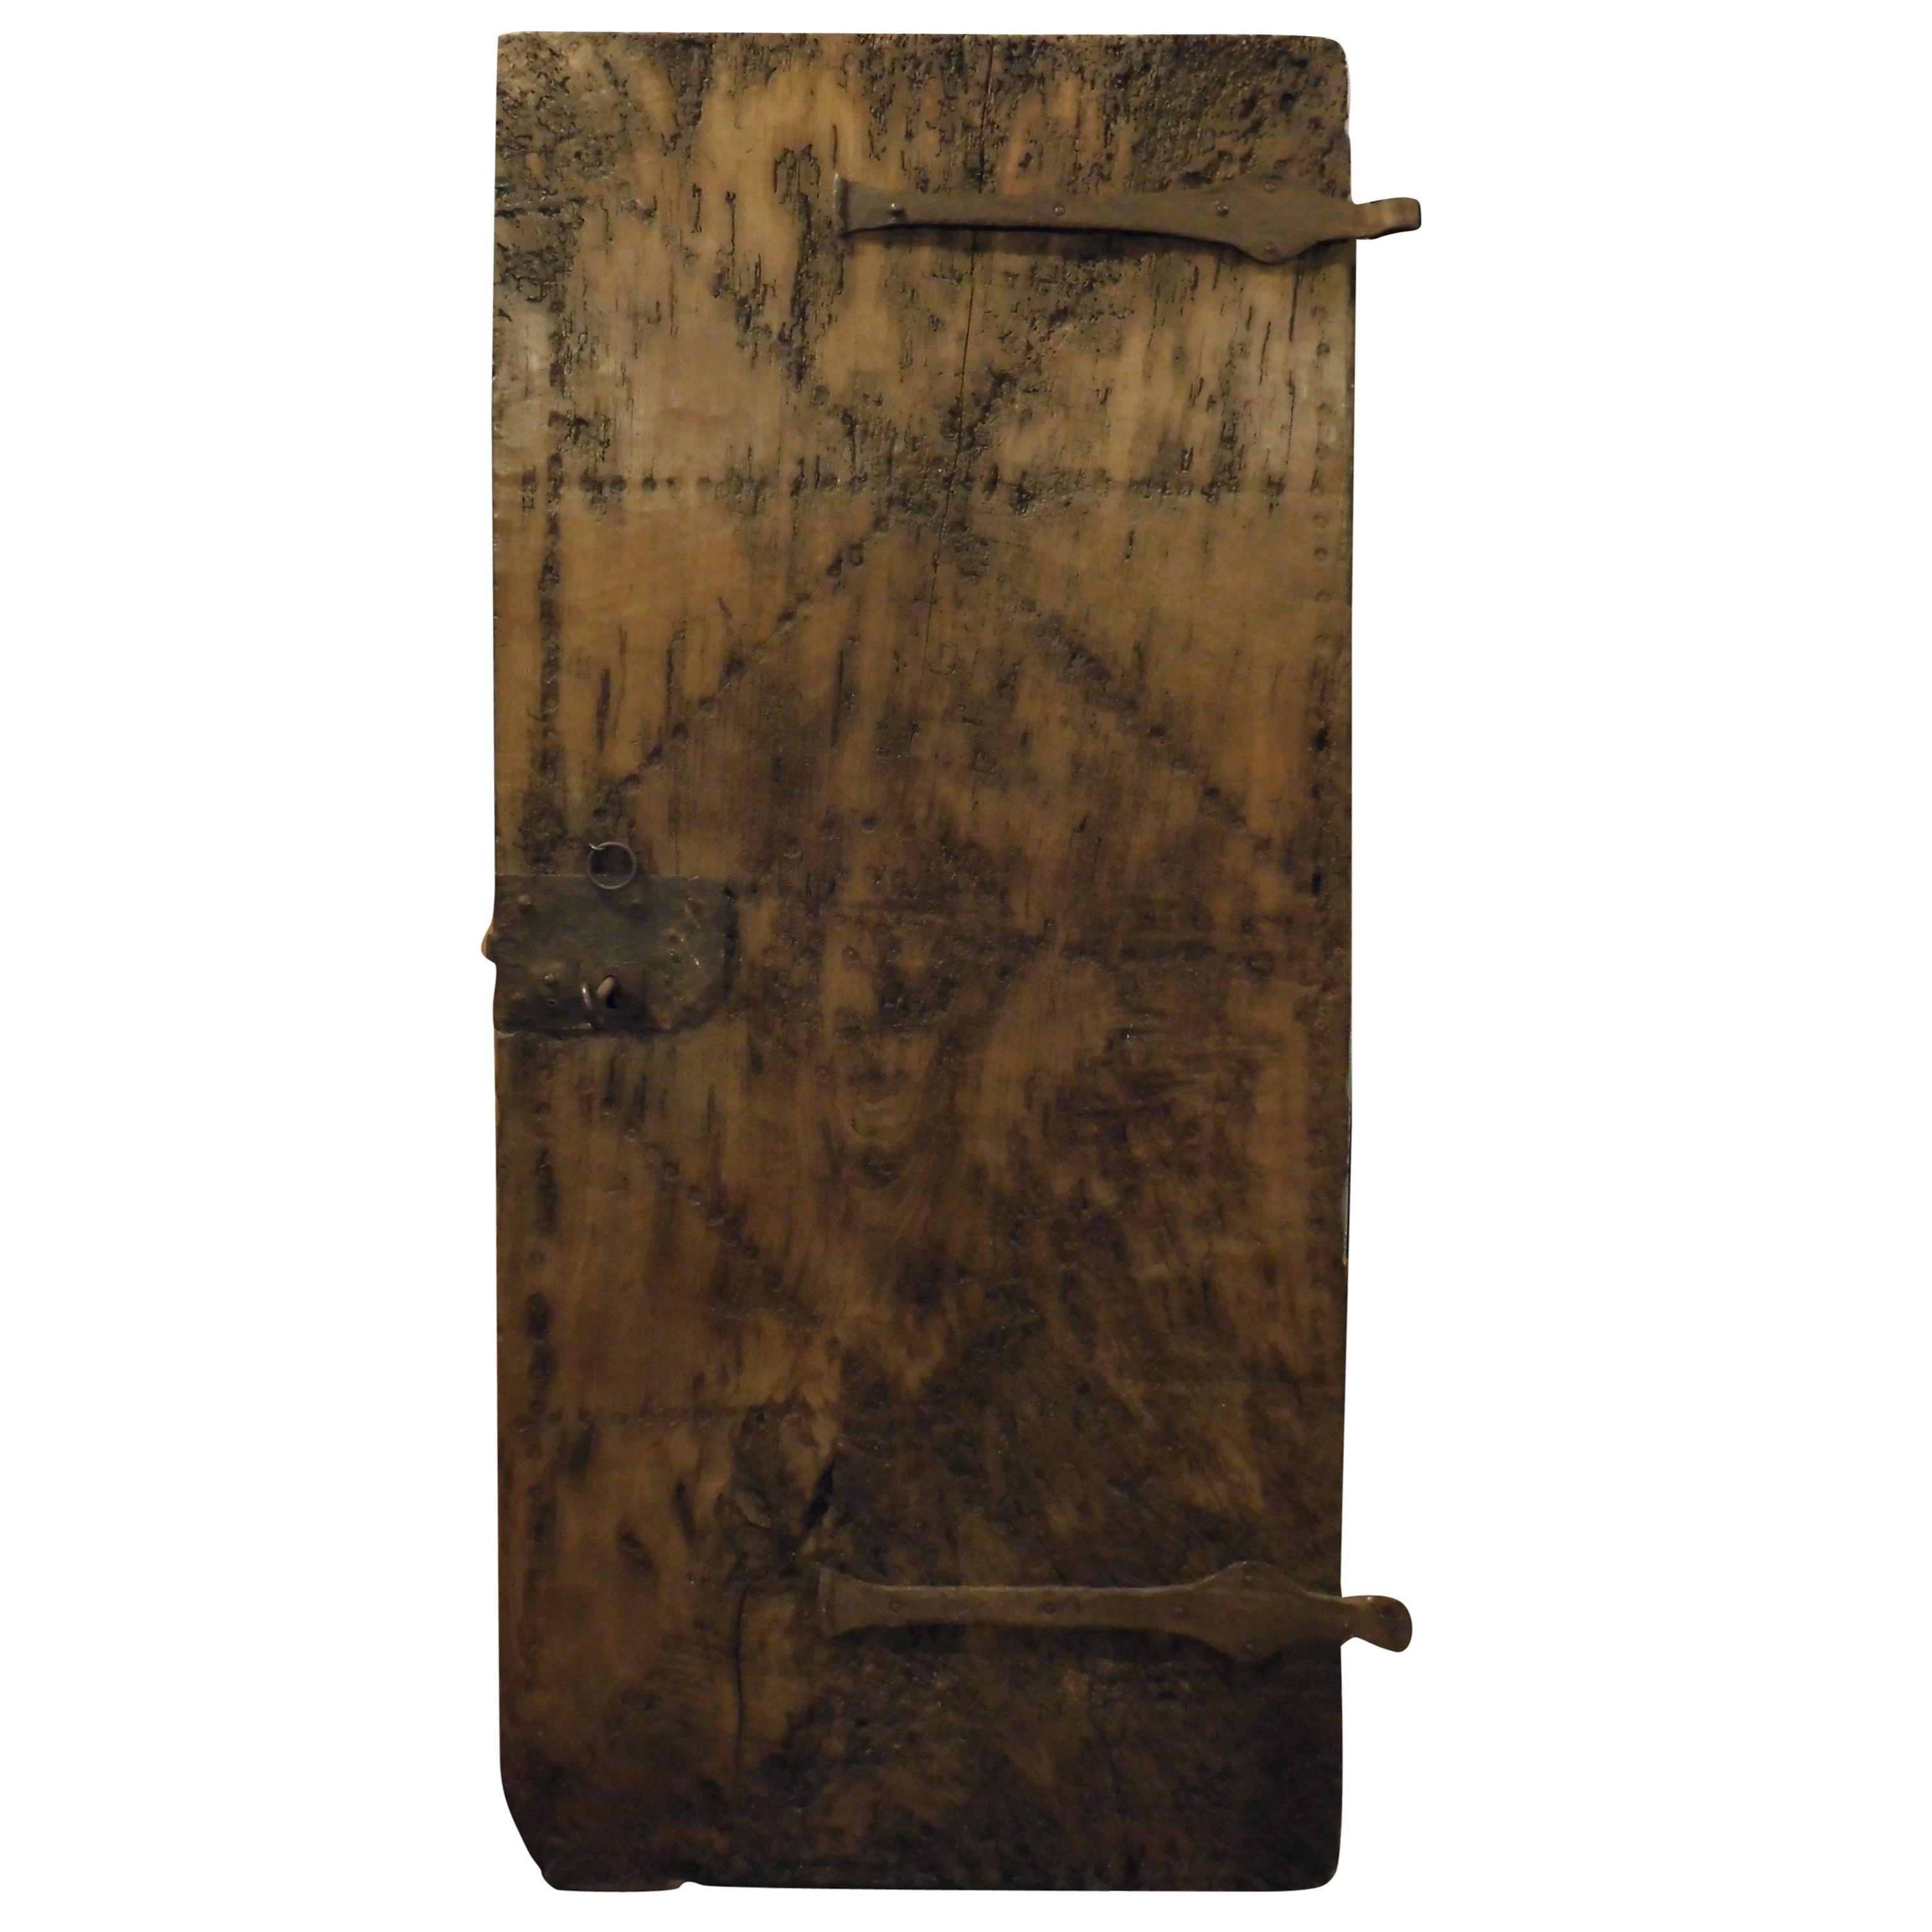 Antique Prison Door in a Single Wooden Planking, 18th Century, France